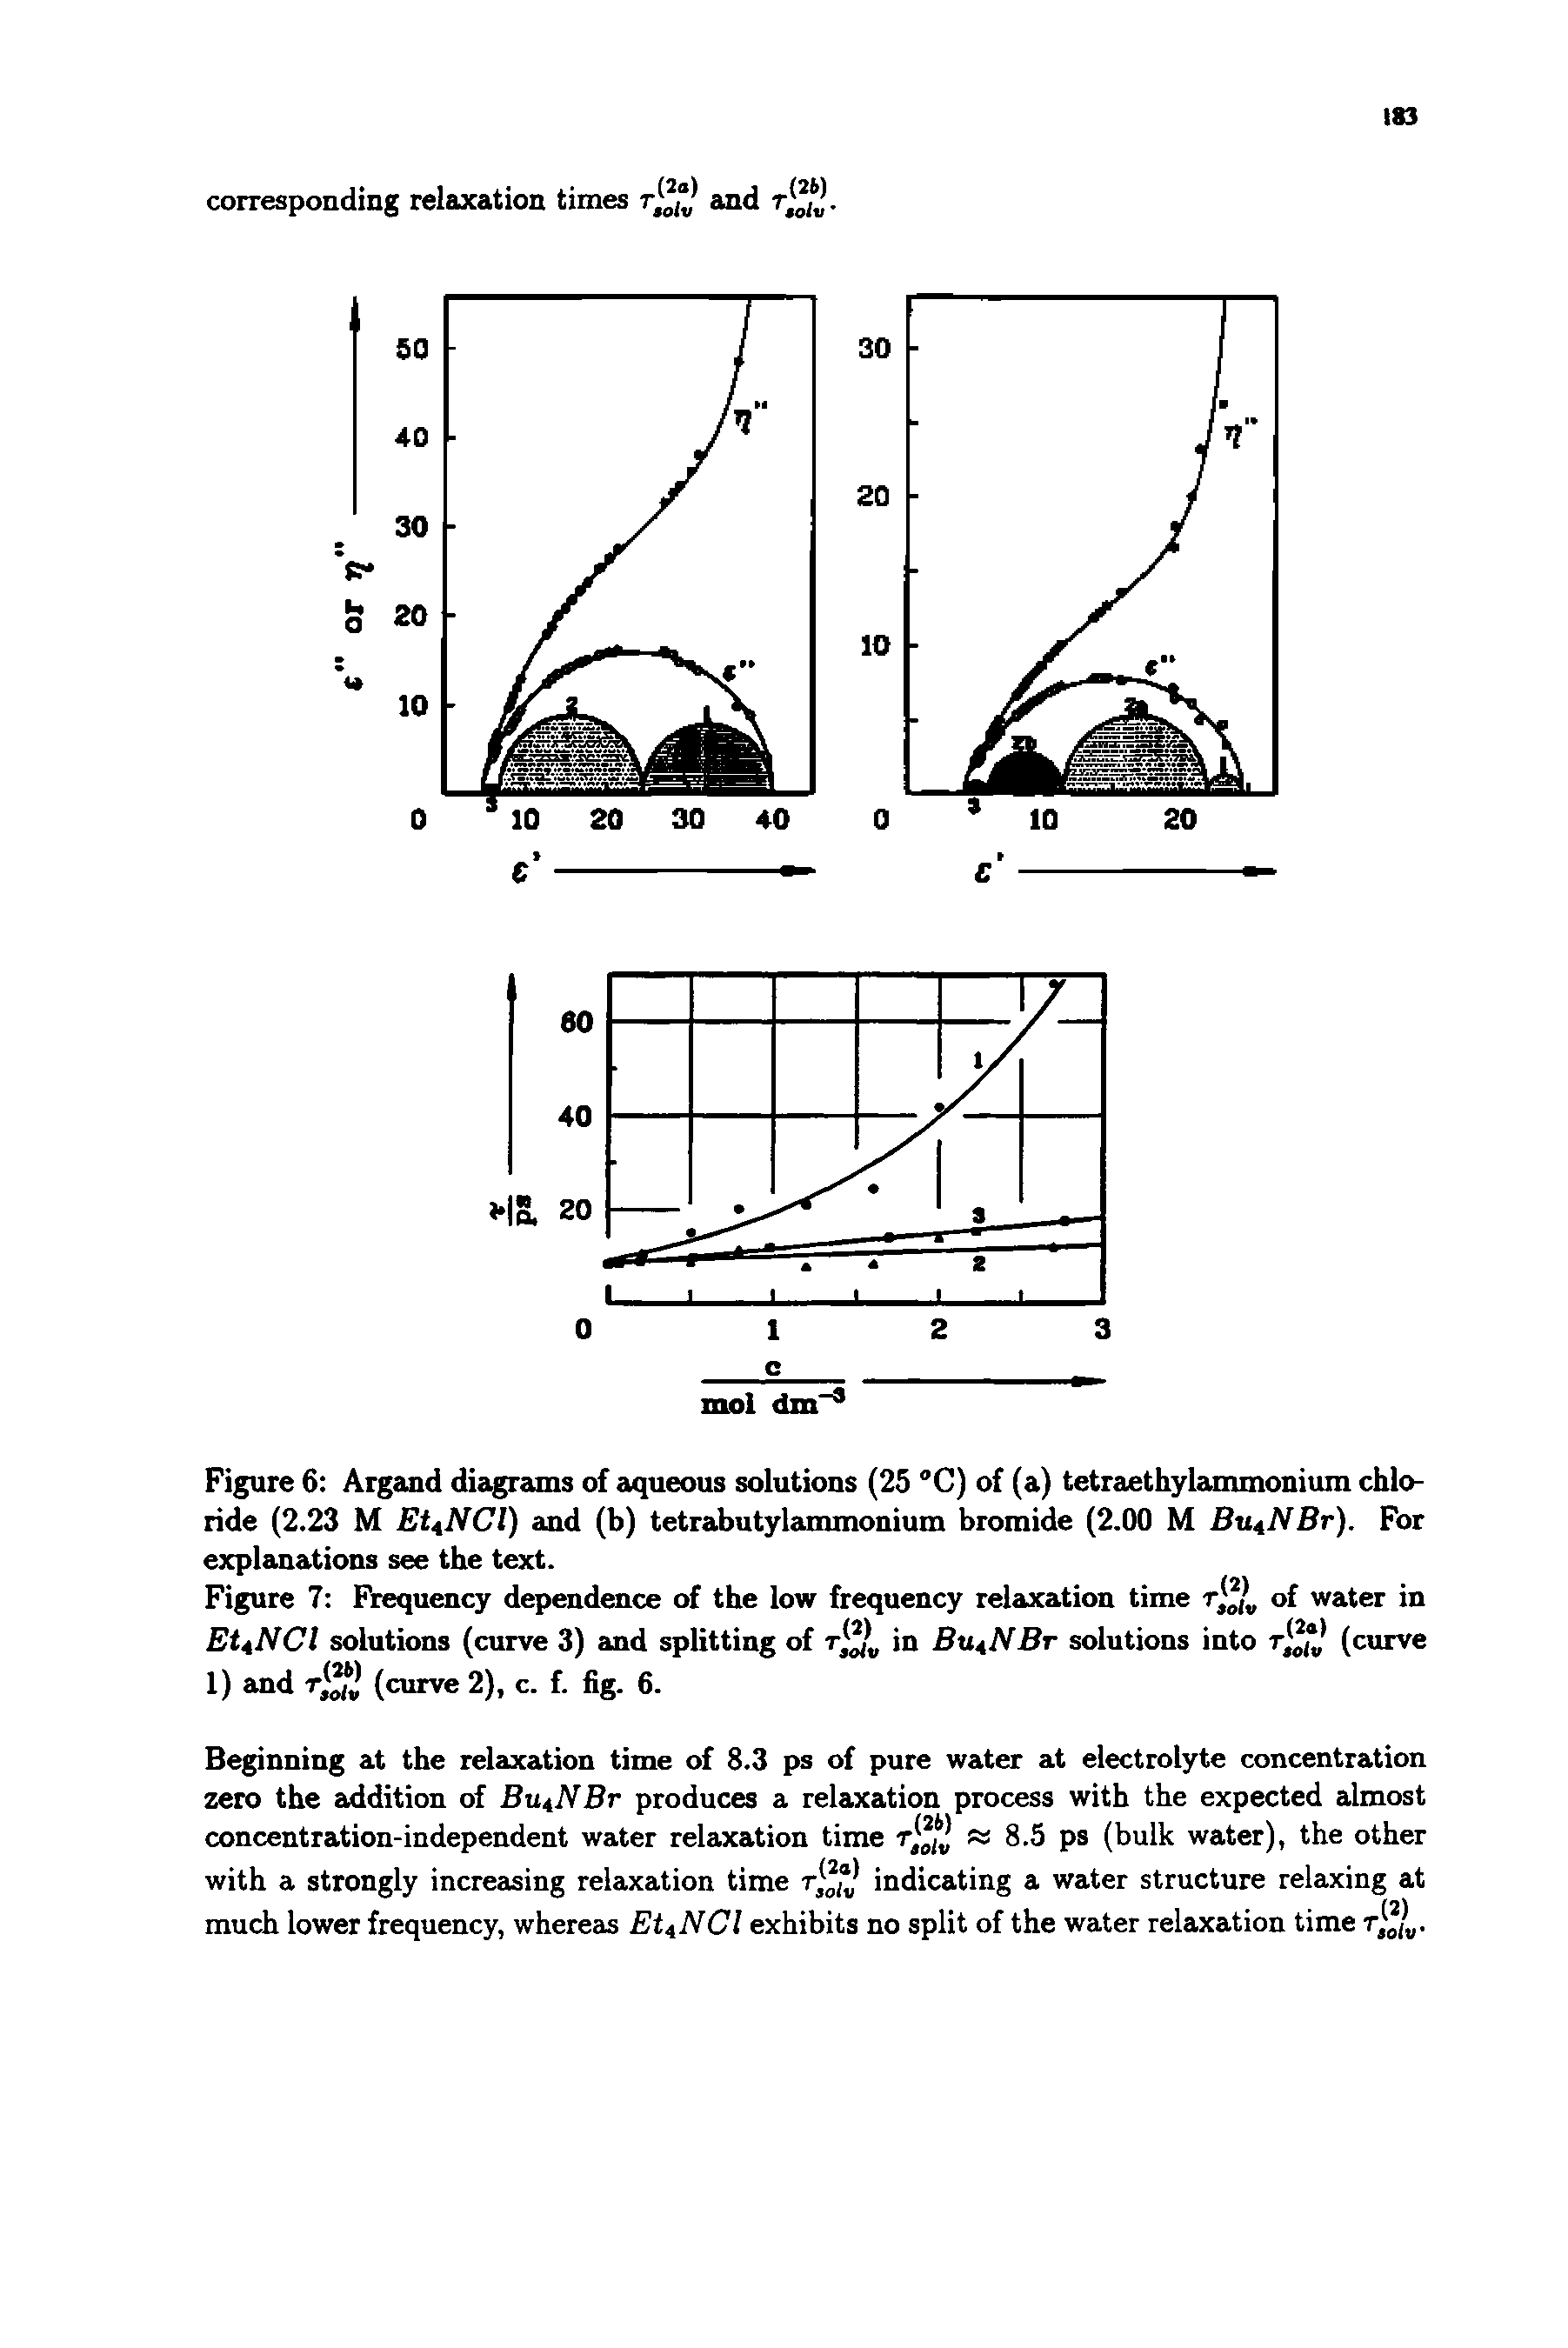 Figure 7 Frequency dependence of the low frequency relaxation time r l of water in EttNCl solutions (curve 3) and splitting of in ButNBr solutions into (curve 1) and (curve 2), c. f. fig. 6.